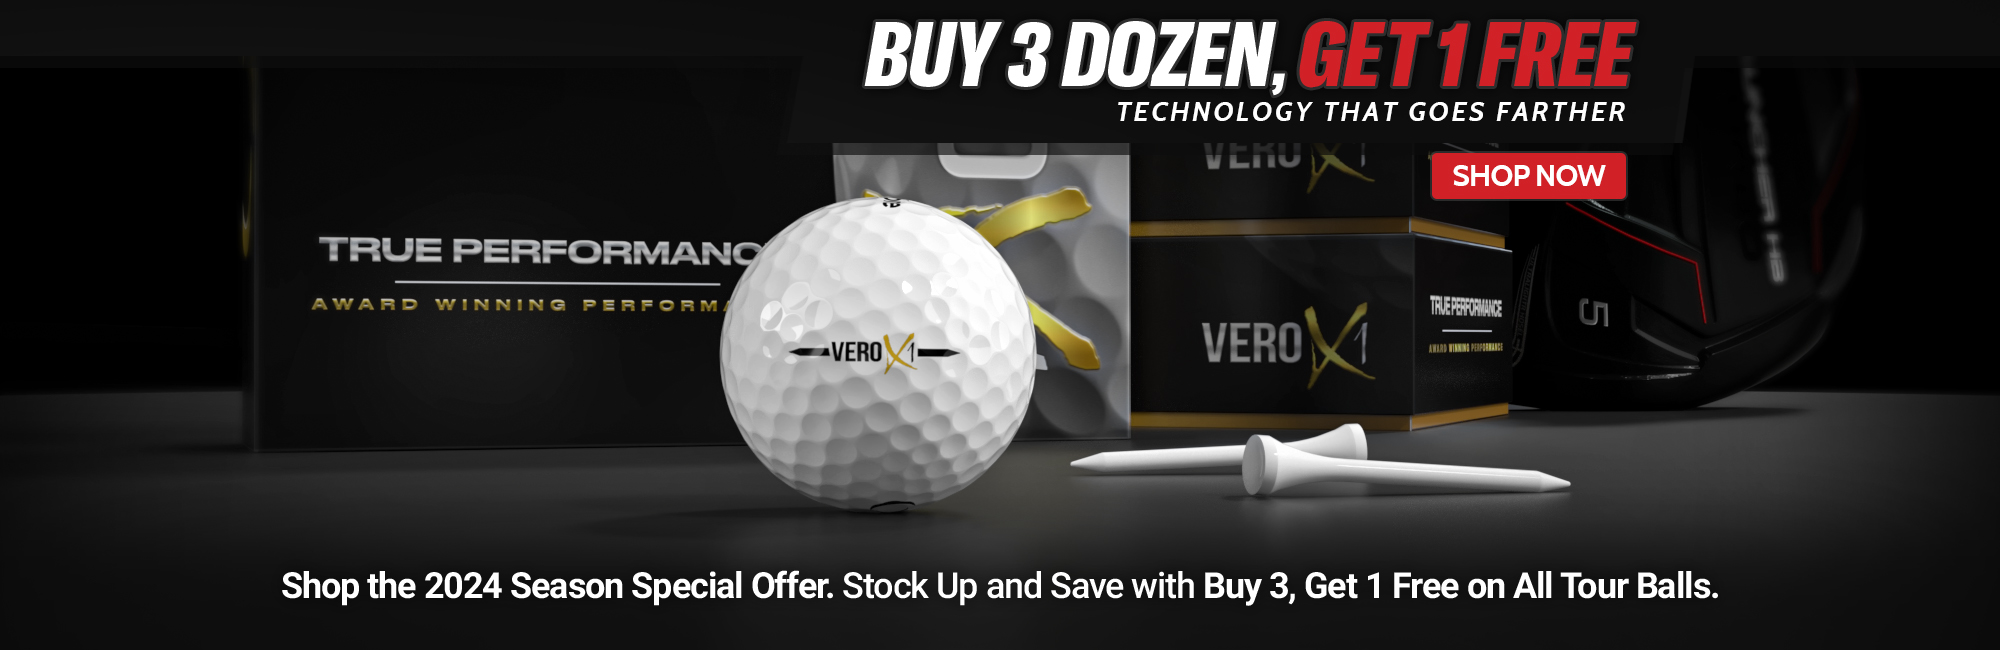 Shop 2024 Golf Season Special - B3G1 Free Offer on All OnCore Golf Tour Balls